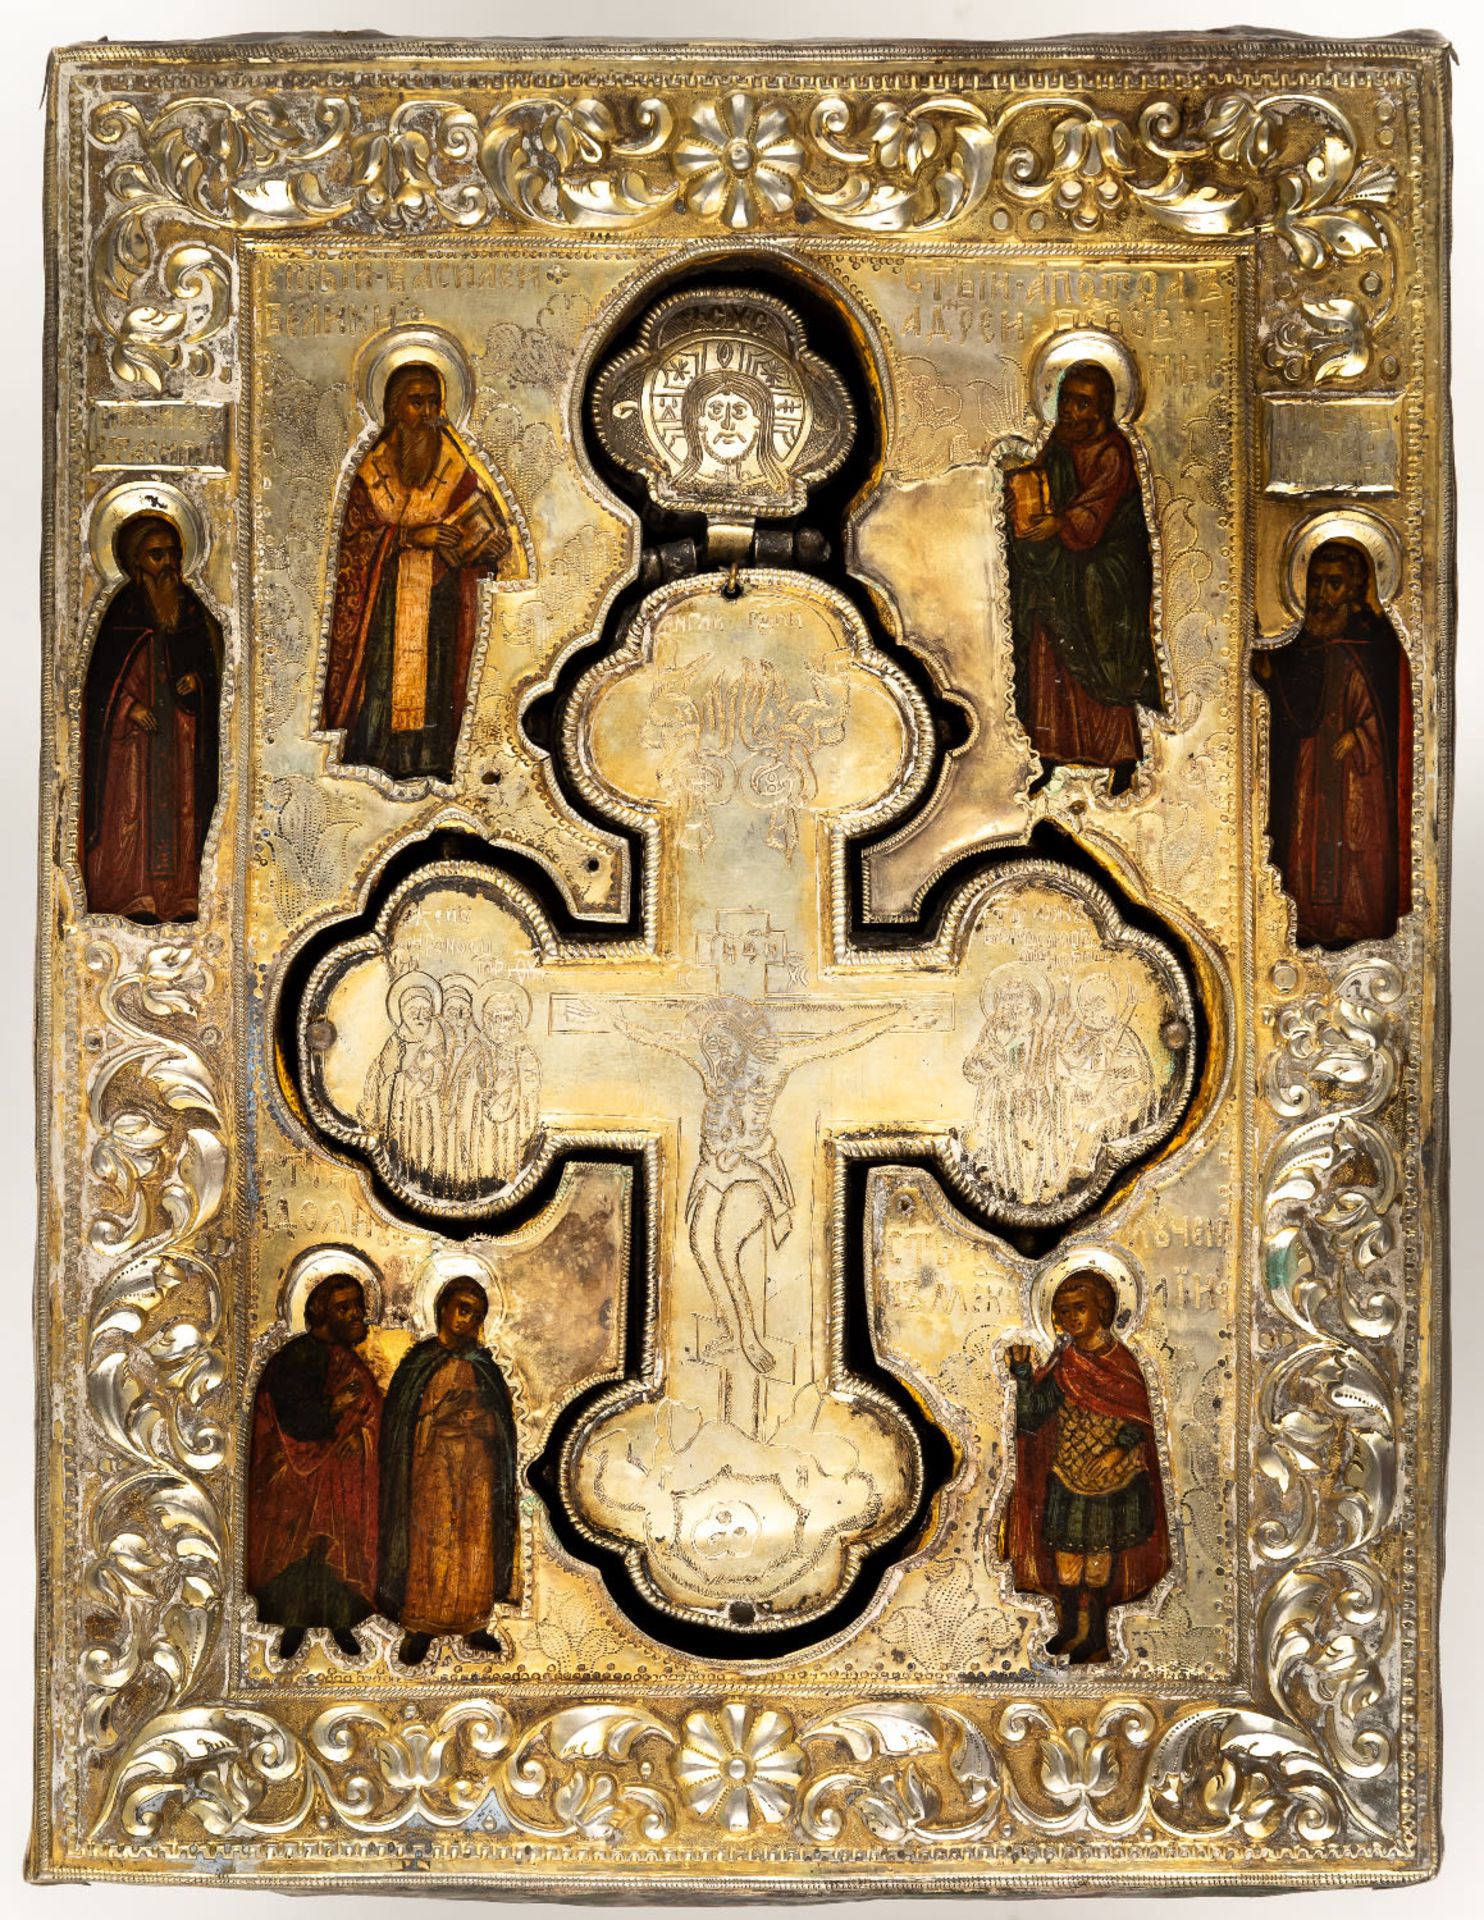 EXTREMELY RARE RELIQUARY ICON WITH SILVER OKLAD AND INSET SILVER CROSS SHOWING THE CRUCIFIXION OF CH